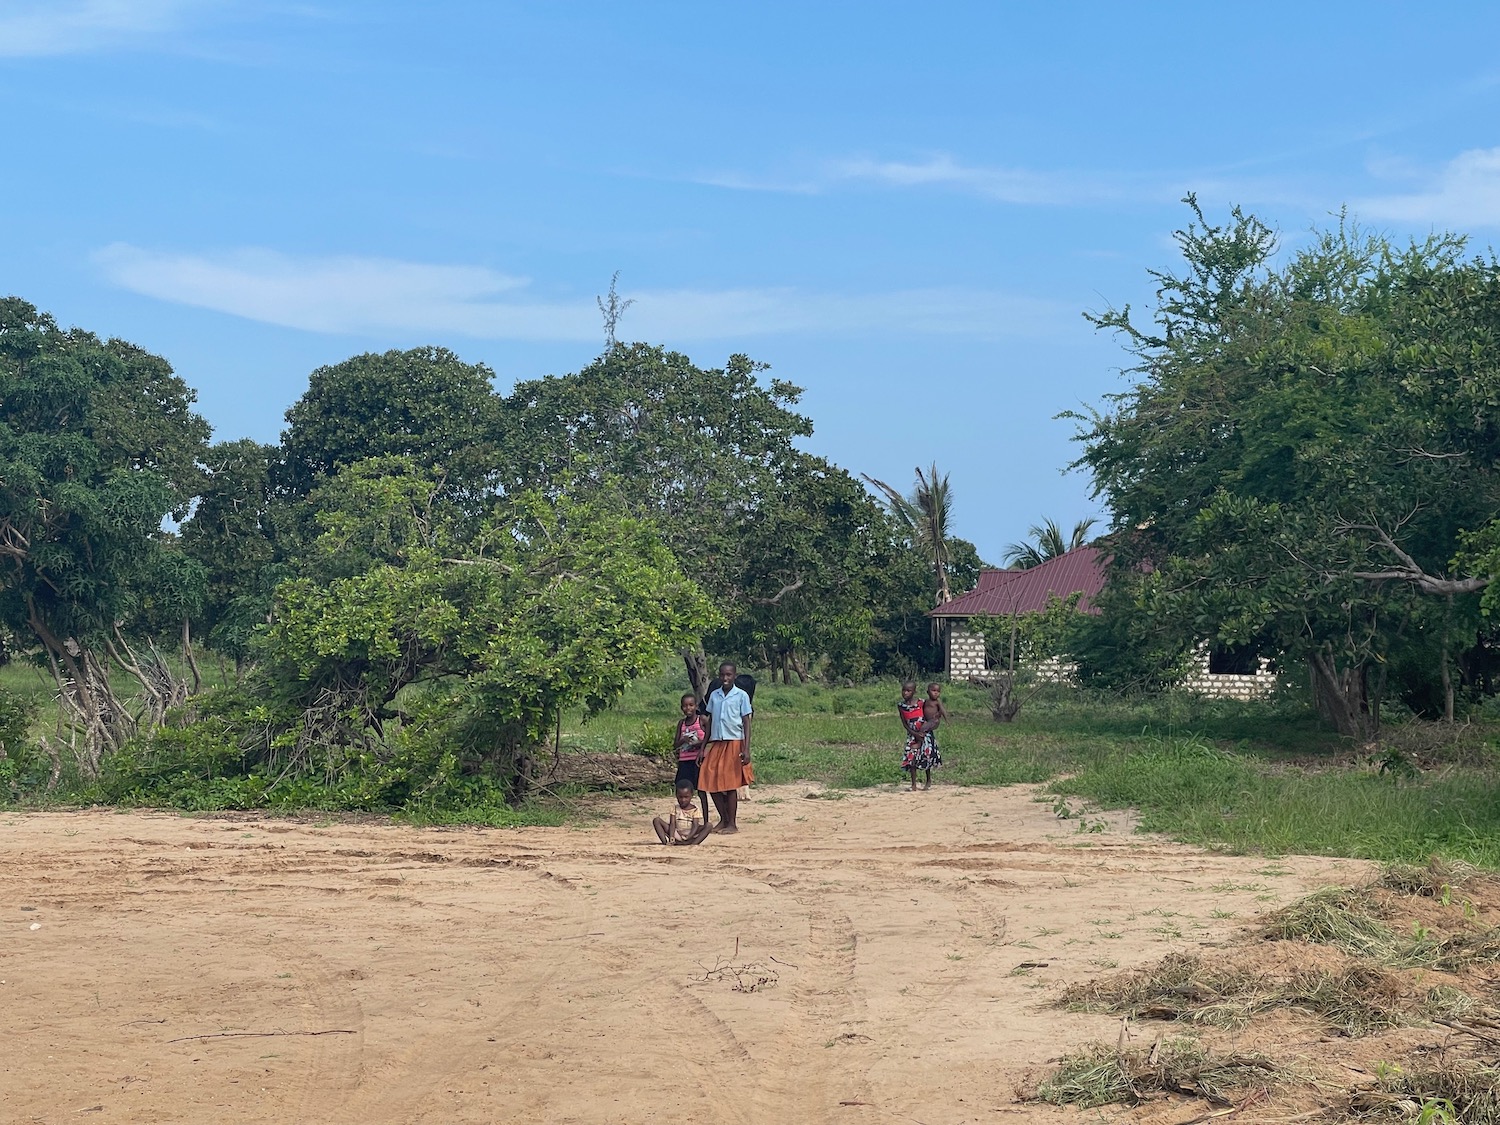 a group of people walking on a dirt road